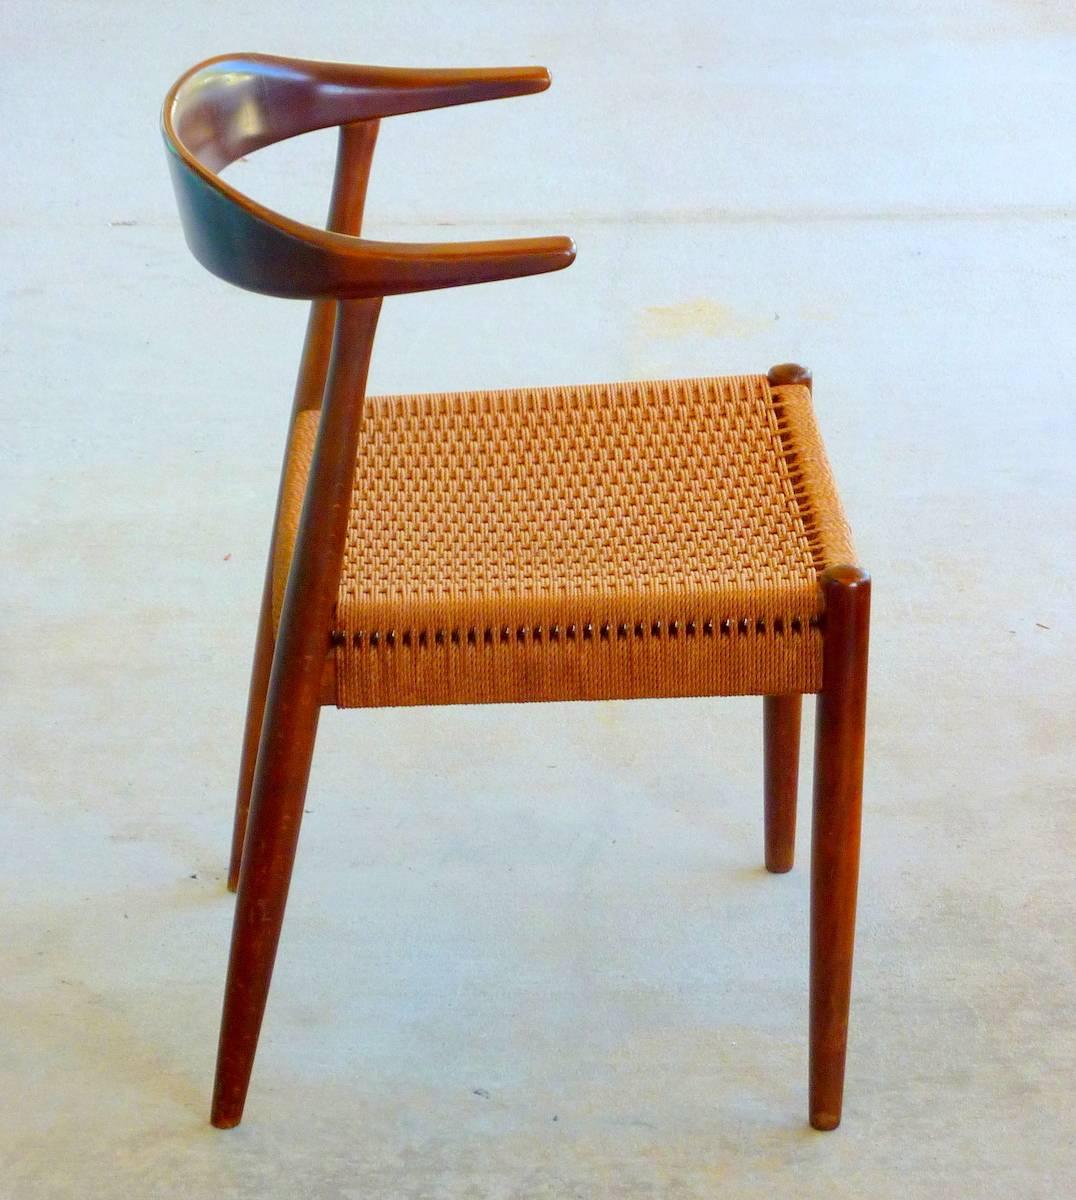 'The Chair' by Hans Wegner is a design Classic. This marvelous Mid-Century version by DUX features a solid walnut frame and woven papercord seat. Original paper label has come off but has been retained.

Woven papercord (aka Danish cord) is among